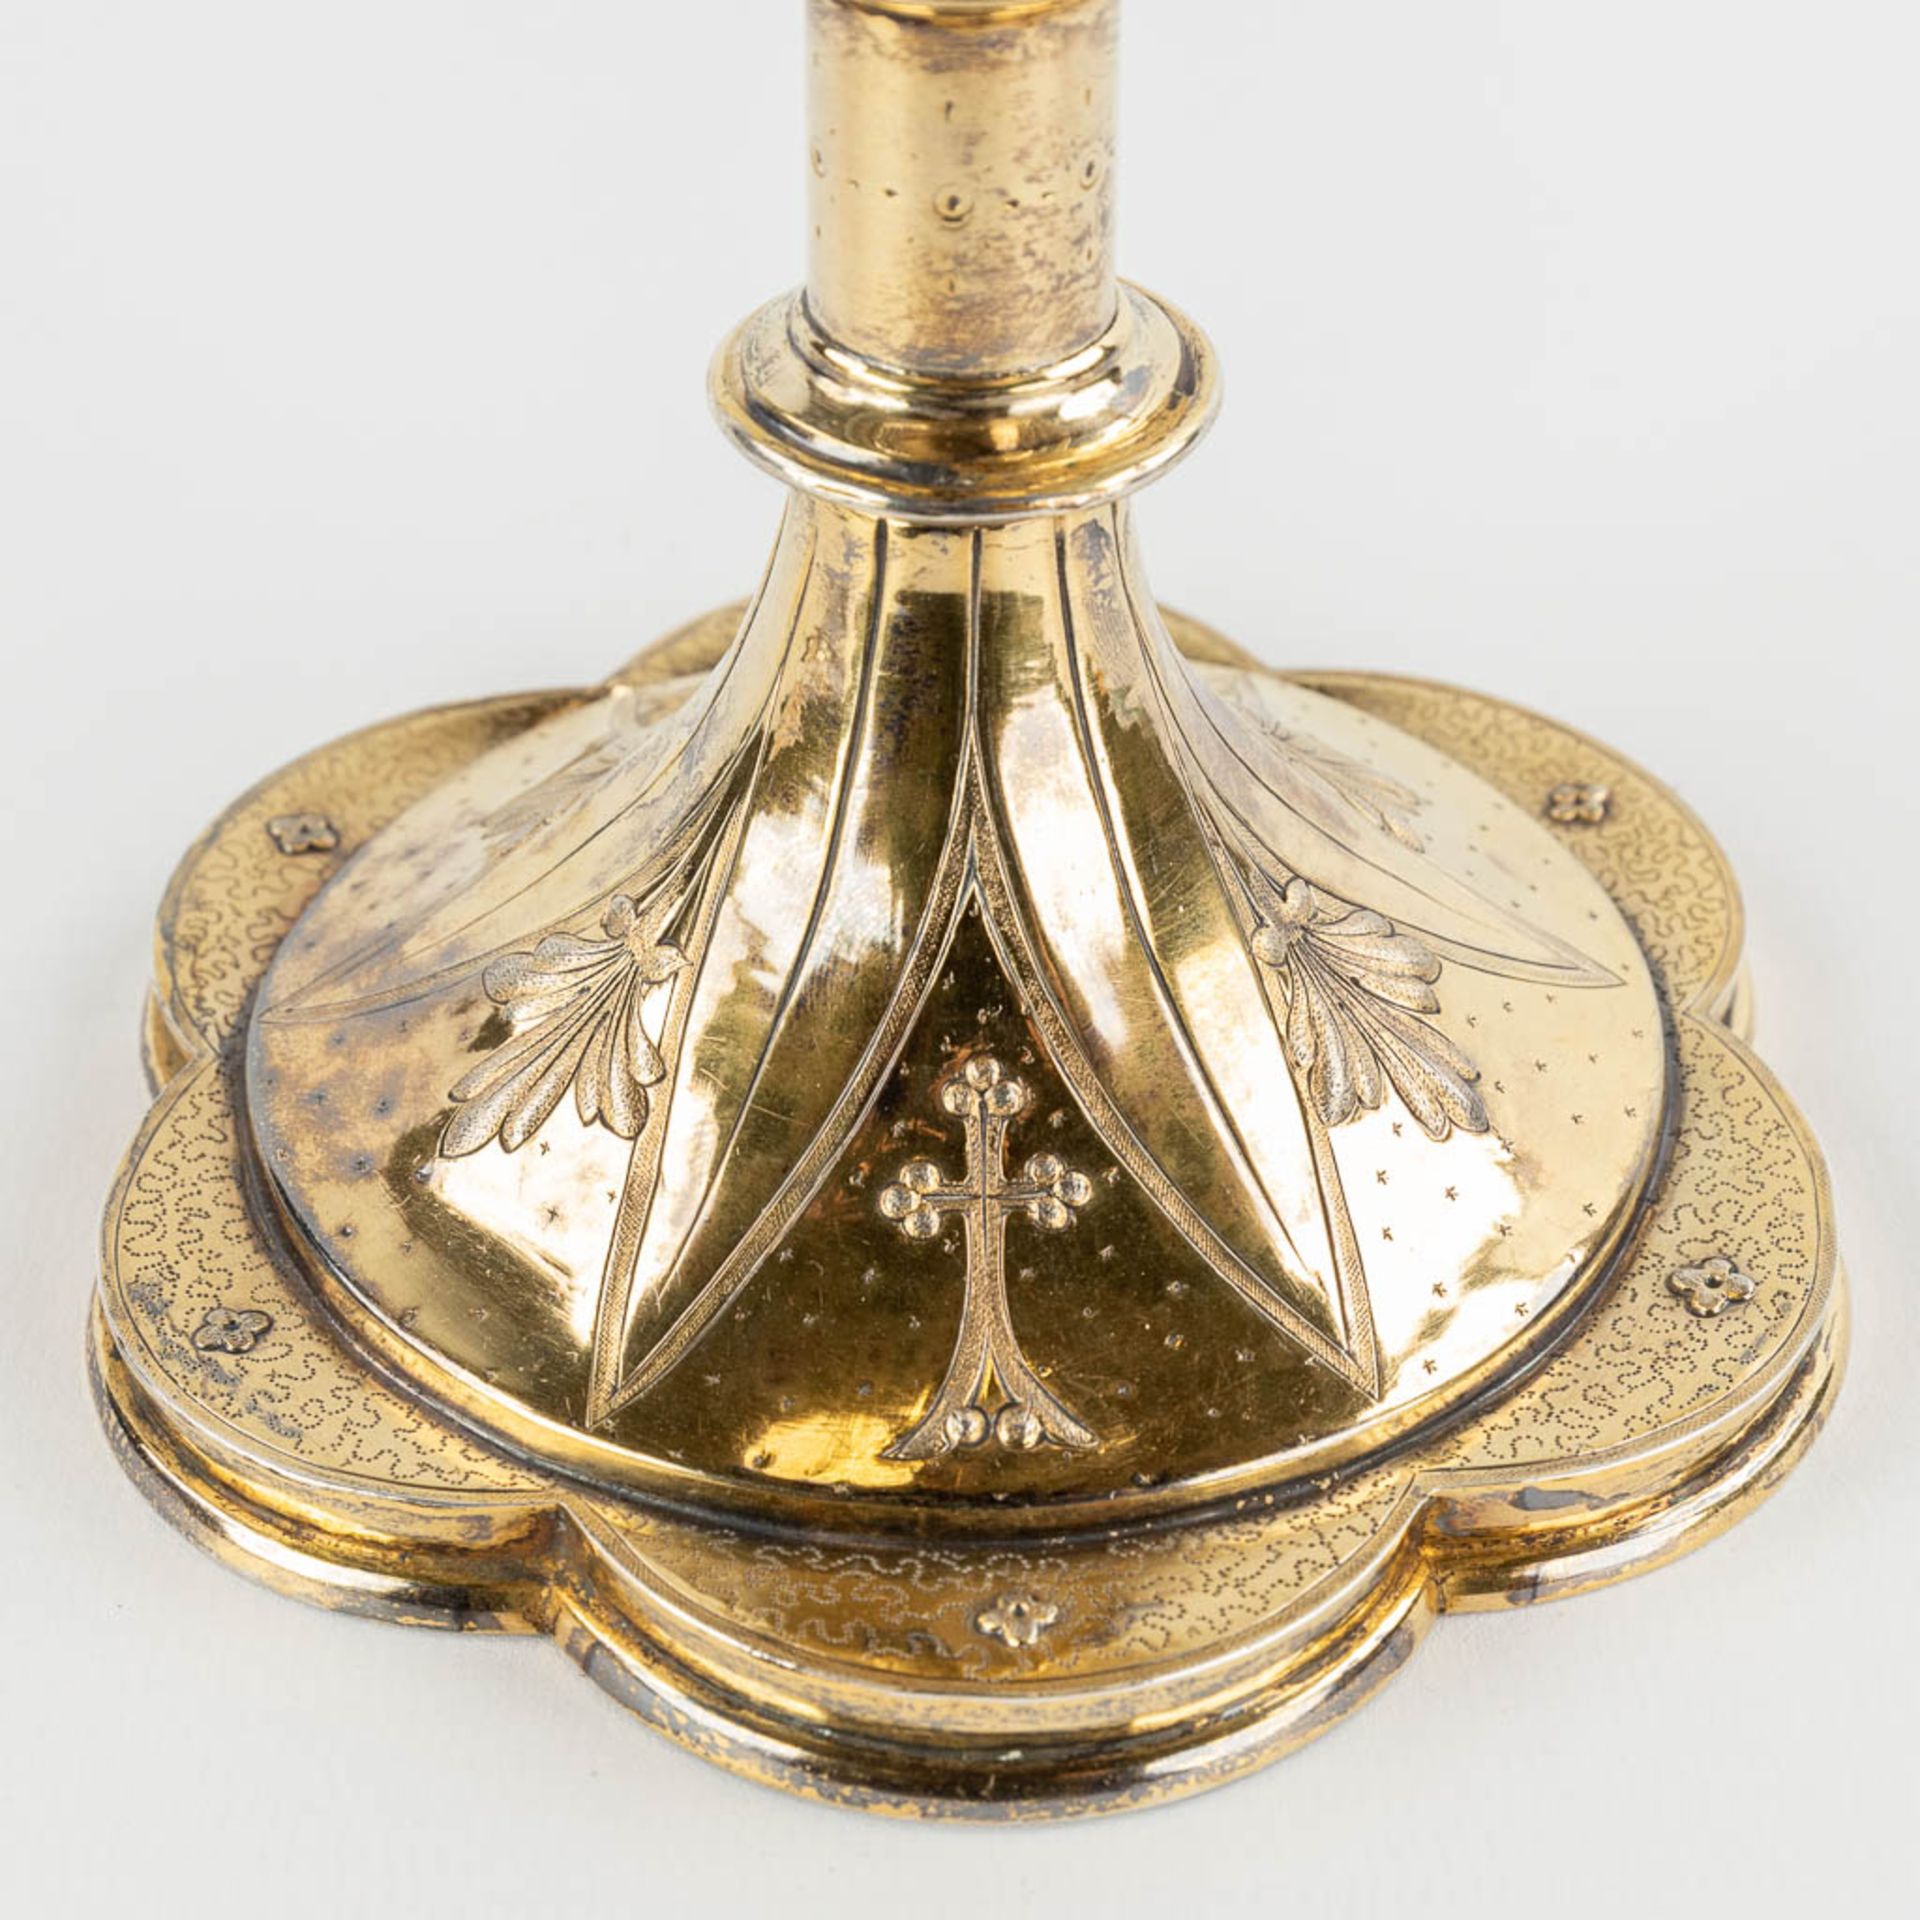 A Chalice with paten, gilt silver in gothic revival style. 305g. (H:19,5 x D:12,5 cm) - Image 12 of 16